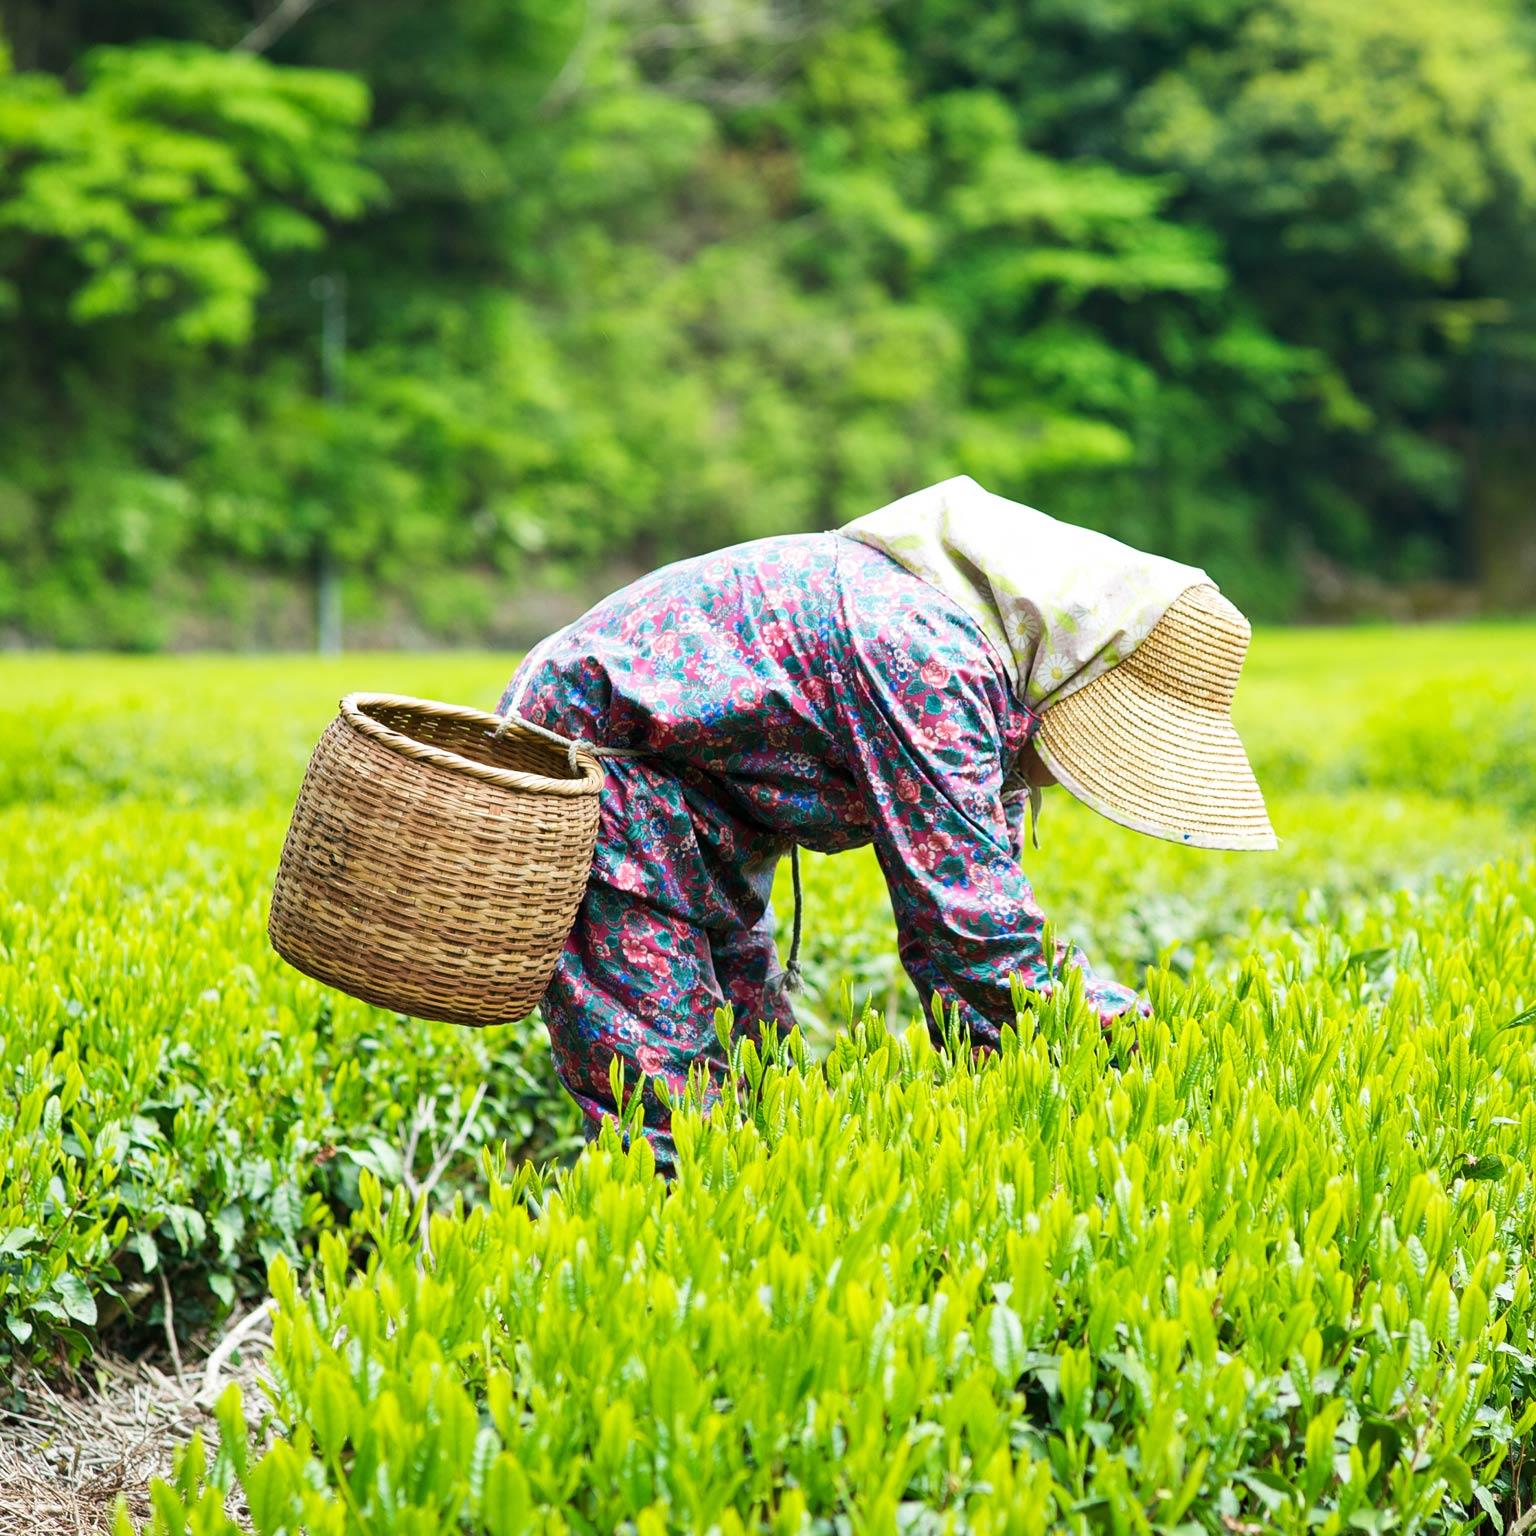 Strengthening Japanese agriculture to maximize global reach ...